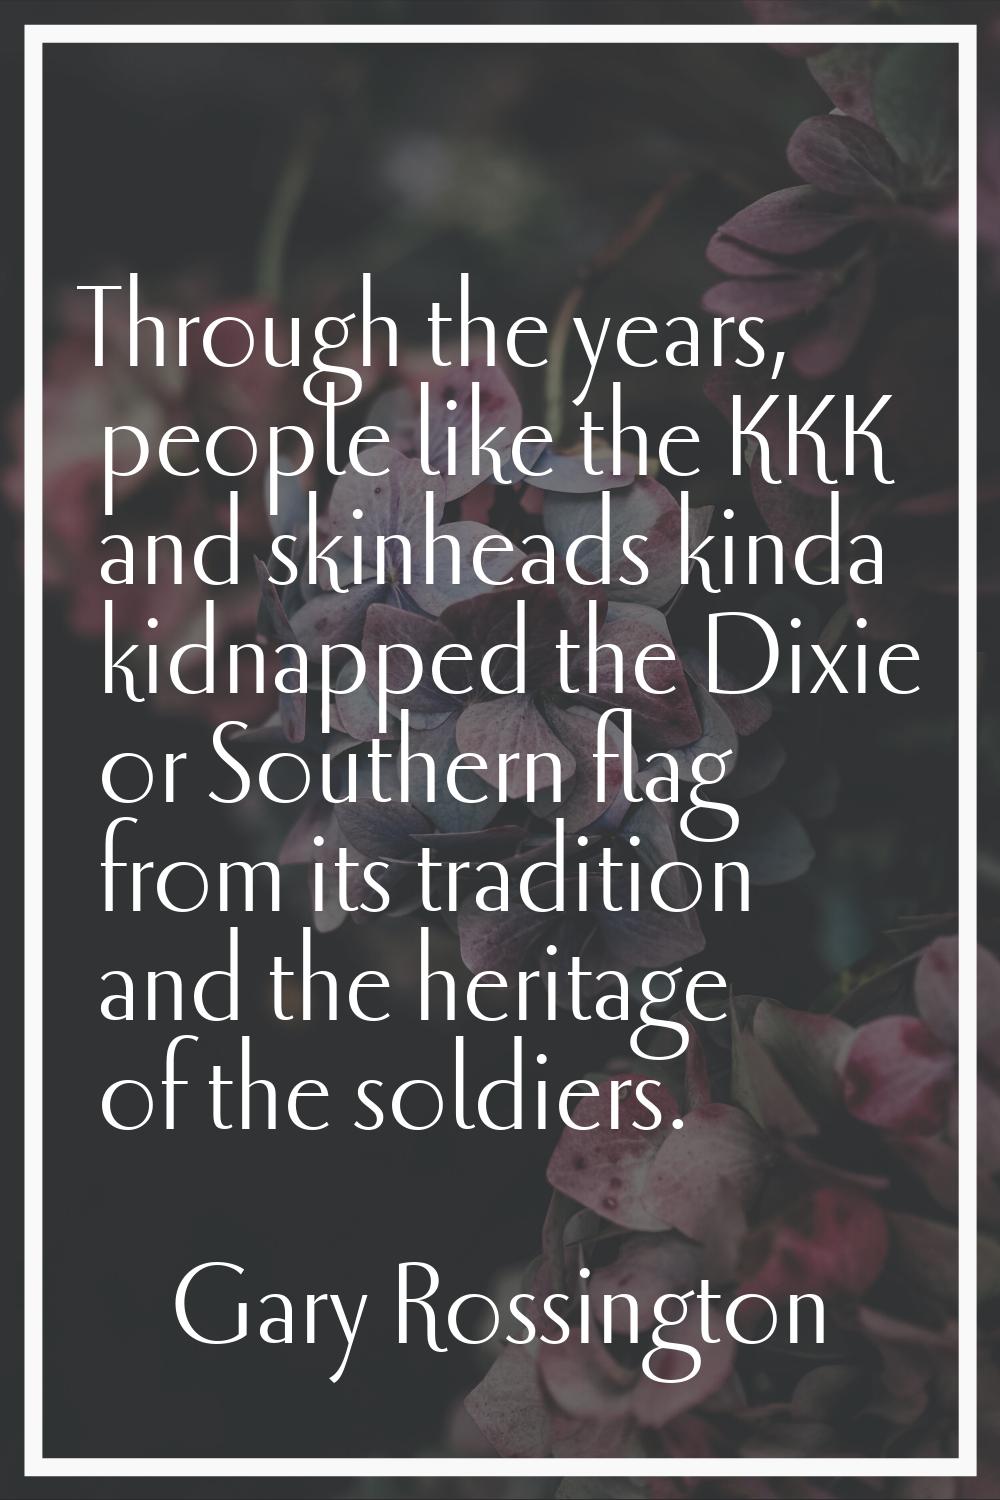 Through the years, people like the KKK and skinheads kinda kidnapped the Dixie or Southern flag fro